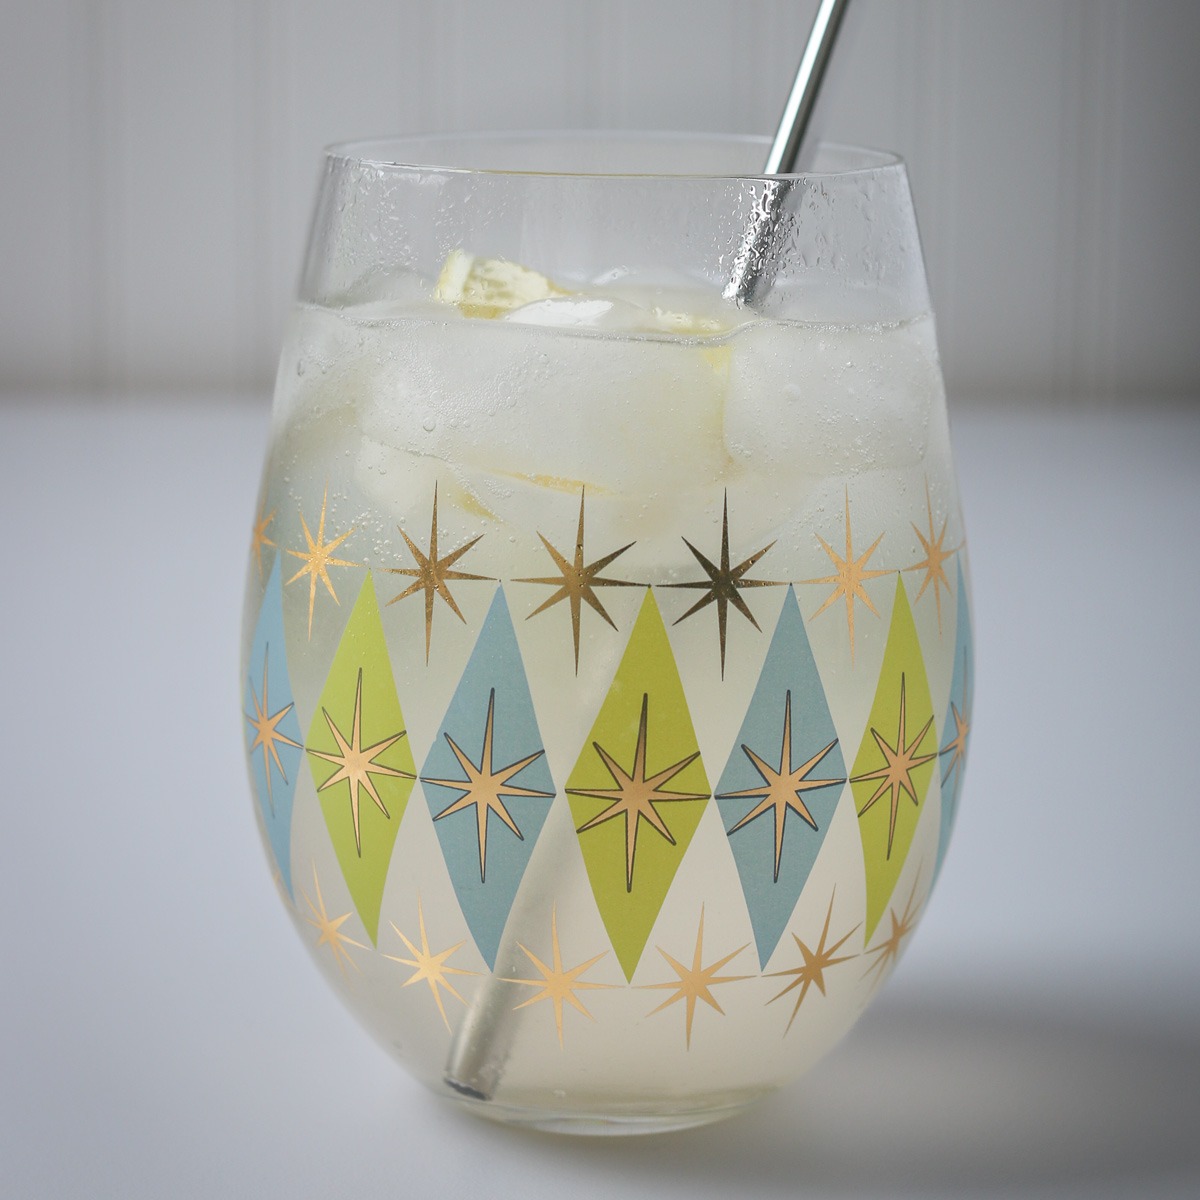 homemade ginger ale in a decorated glass.